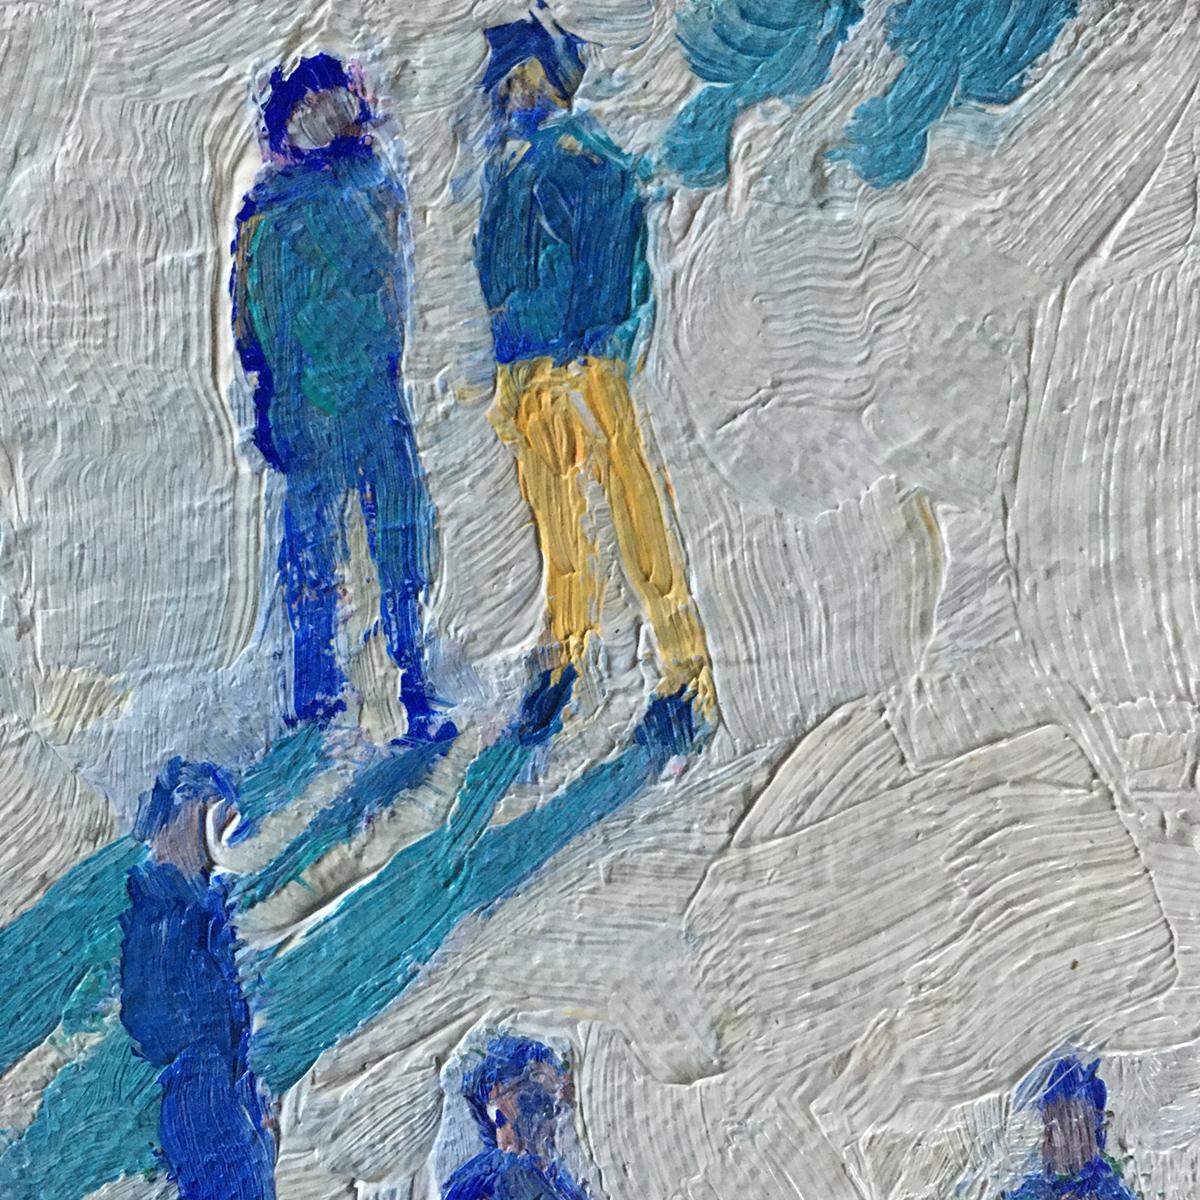 Blue Shadows is an original Painting by Eleanor Woolley. Blue Shadows is one of a series of shadow paintings interested in light, shade and shadow. The artist is exploring the relationship between people and their environment. Phthalo blue is used